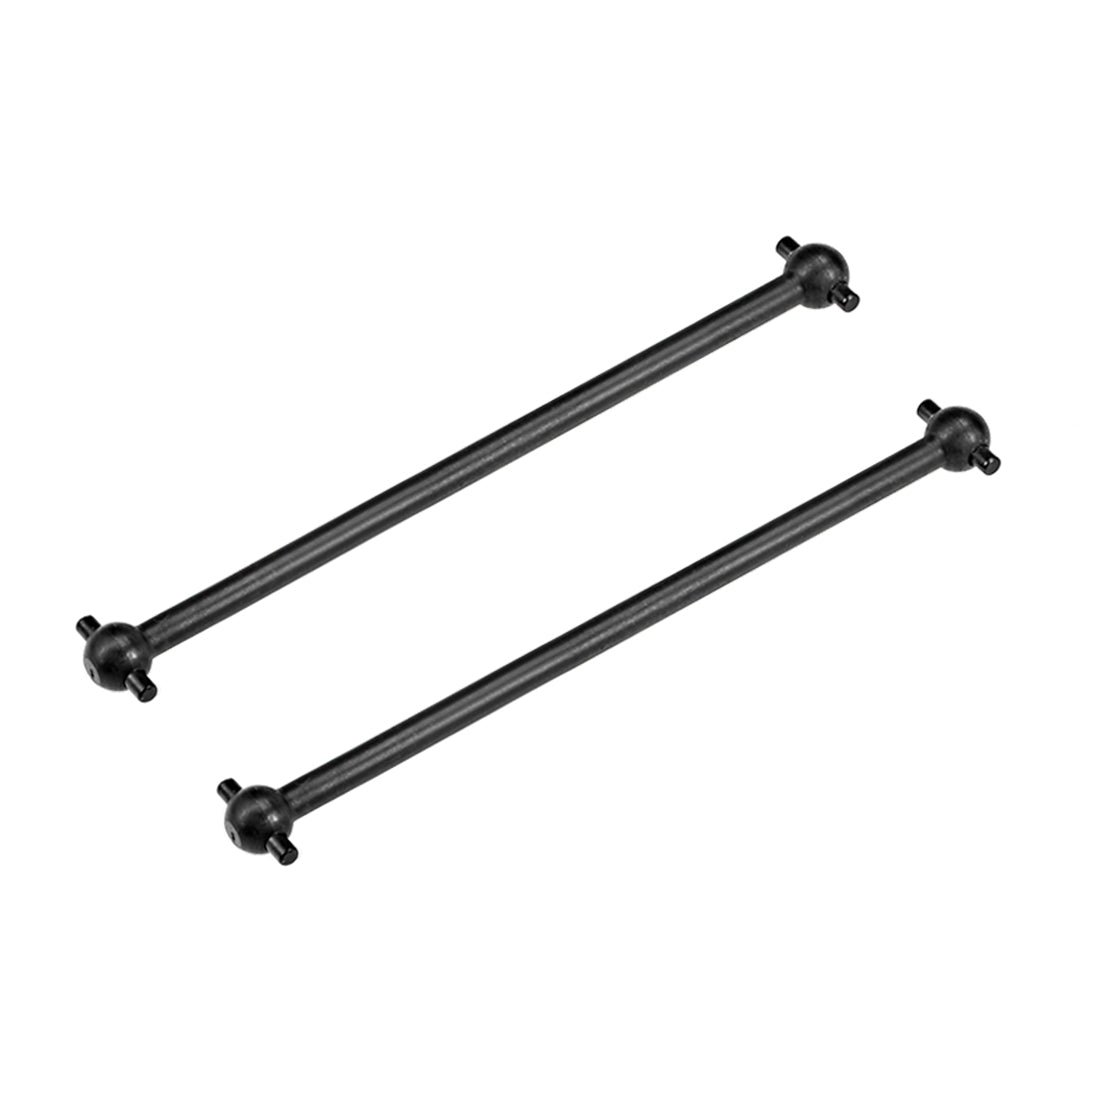 uxcell Uxcell 87mm Drive Shaft for 1/10 RC Car Truck Black 2pcs